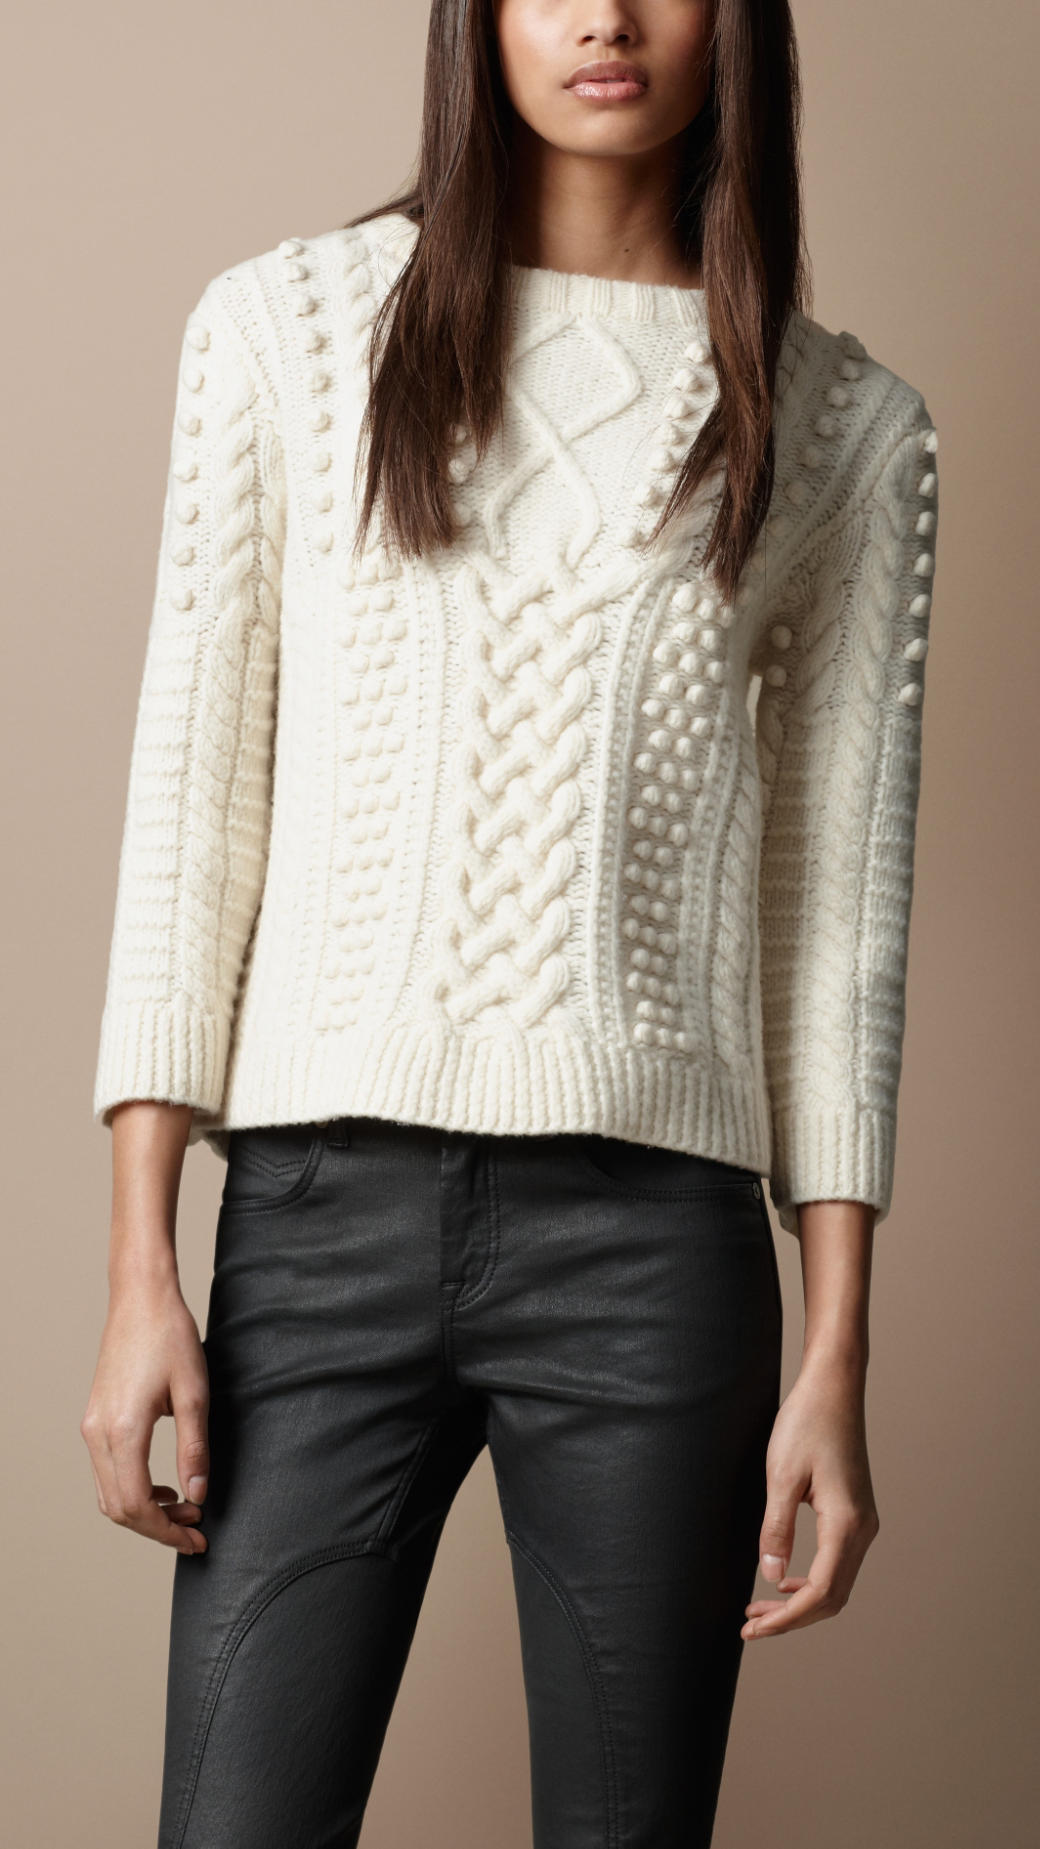 Burberry Brit Cable Knit Sweater in Natural White (White) - Lyst